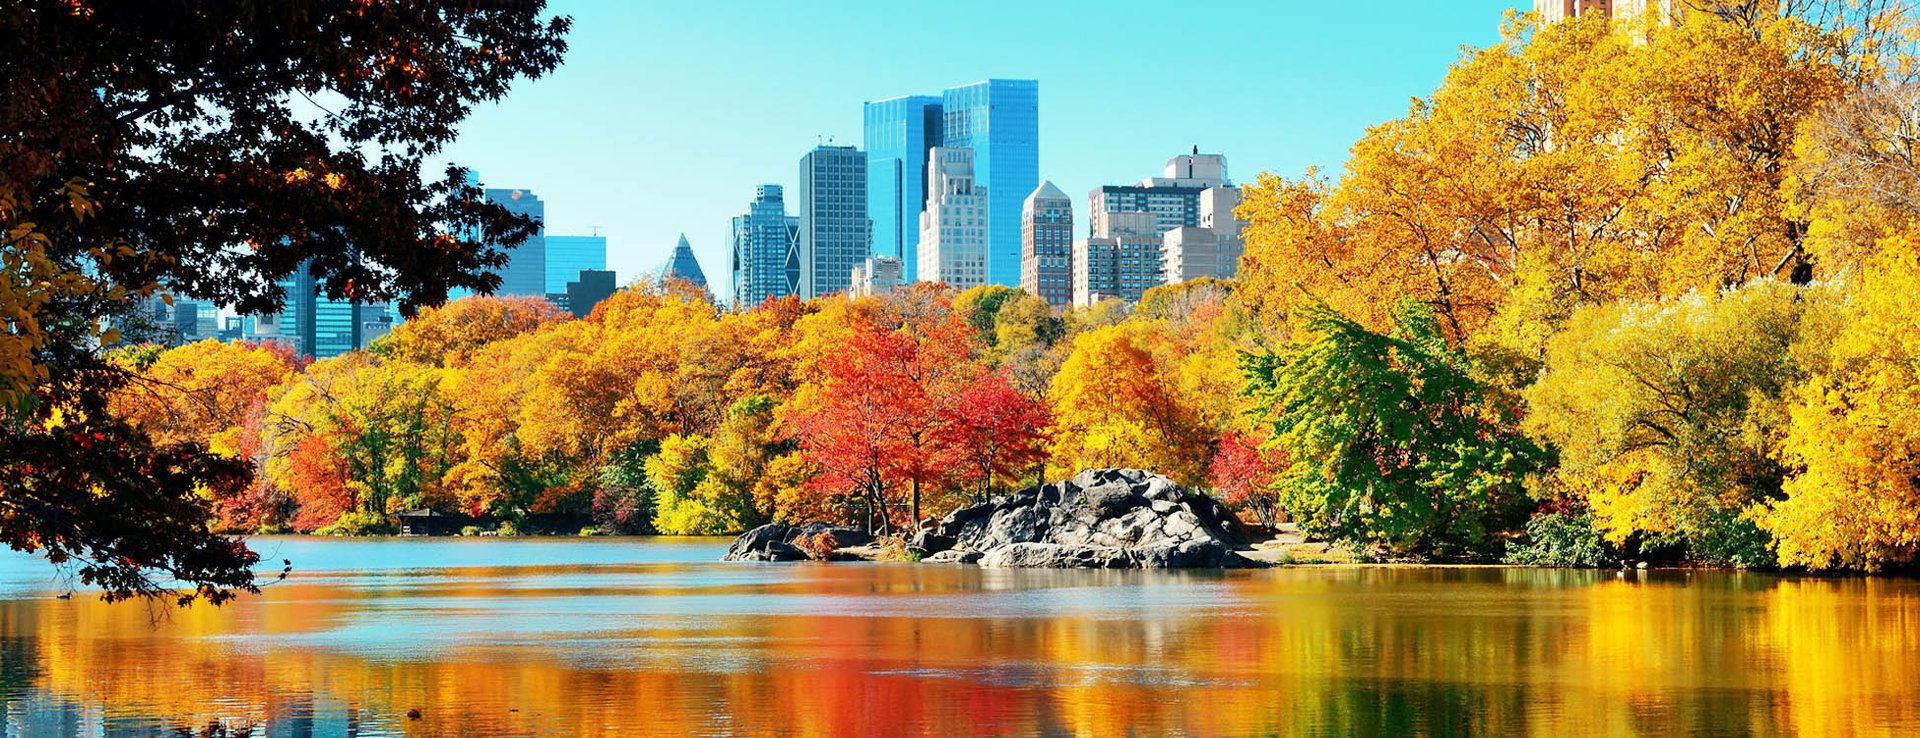 Central Park Autumn and buildings reflection in midtown Manhattan New York City